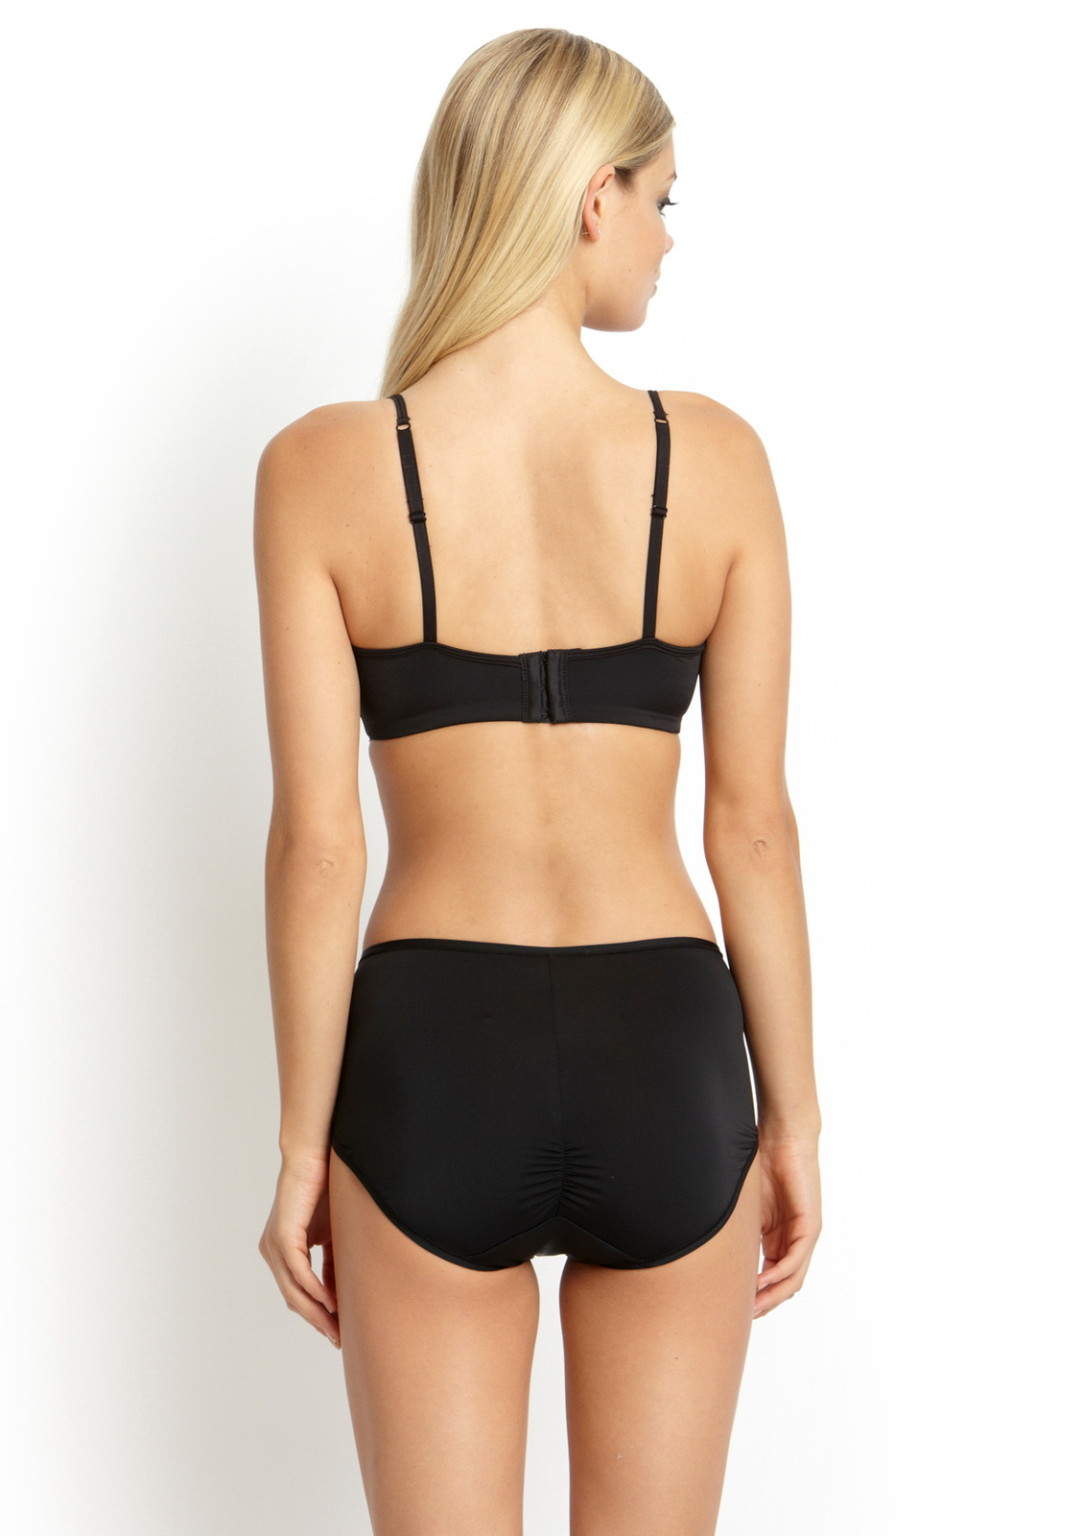 Danielle knudson en actif red hot label by spanx 2015
 #75159420